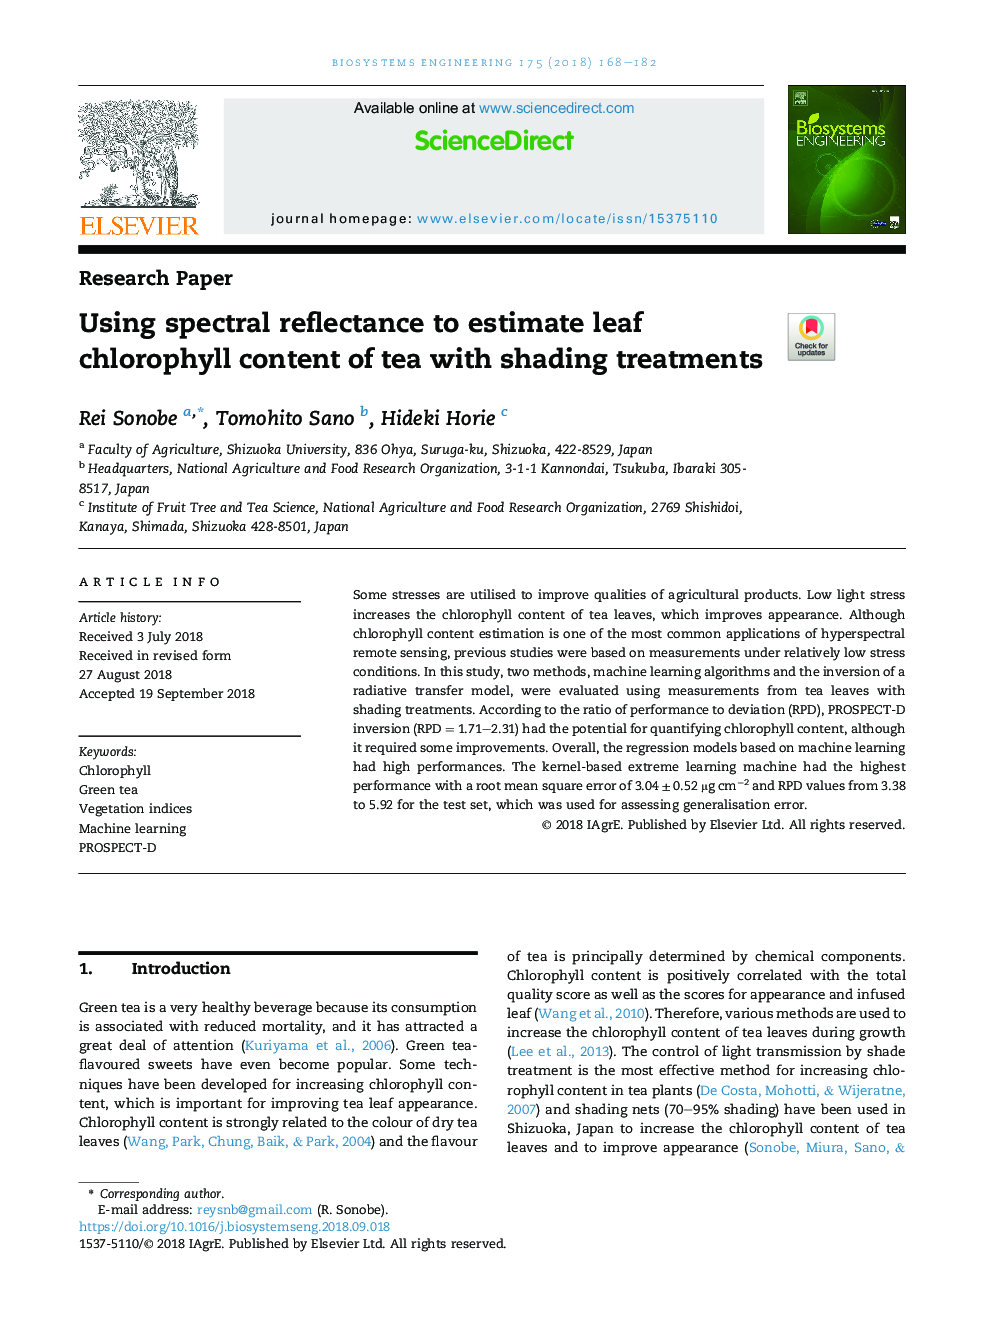 Using spectral reflectance to estimate leaf chlorophyll content of tea with shading treatments